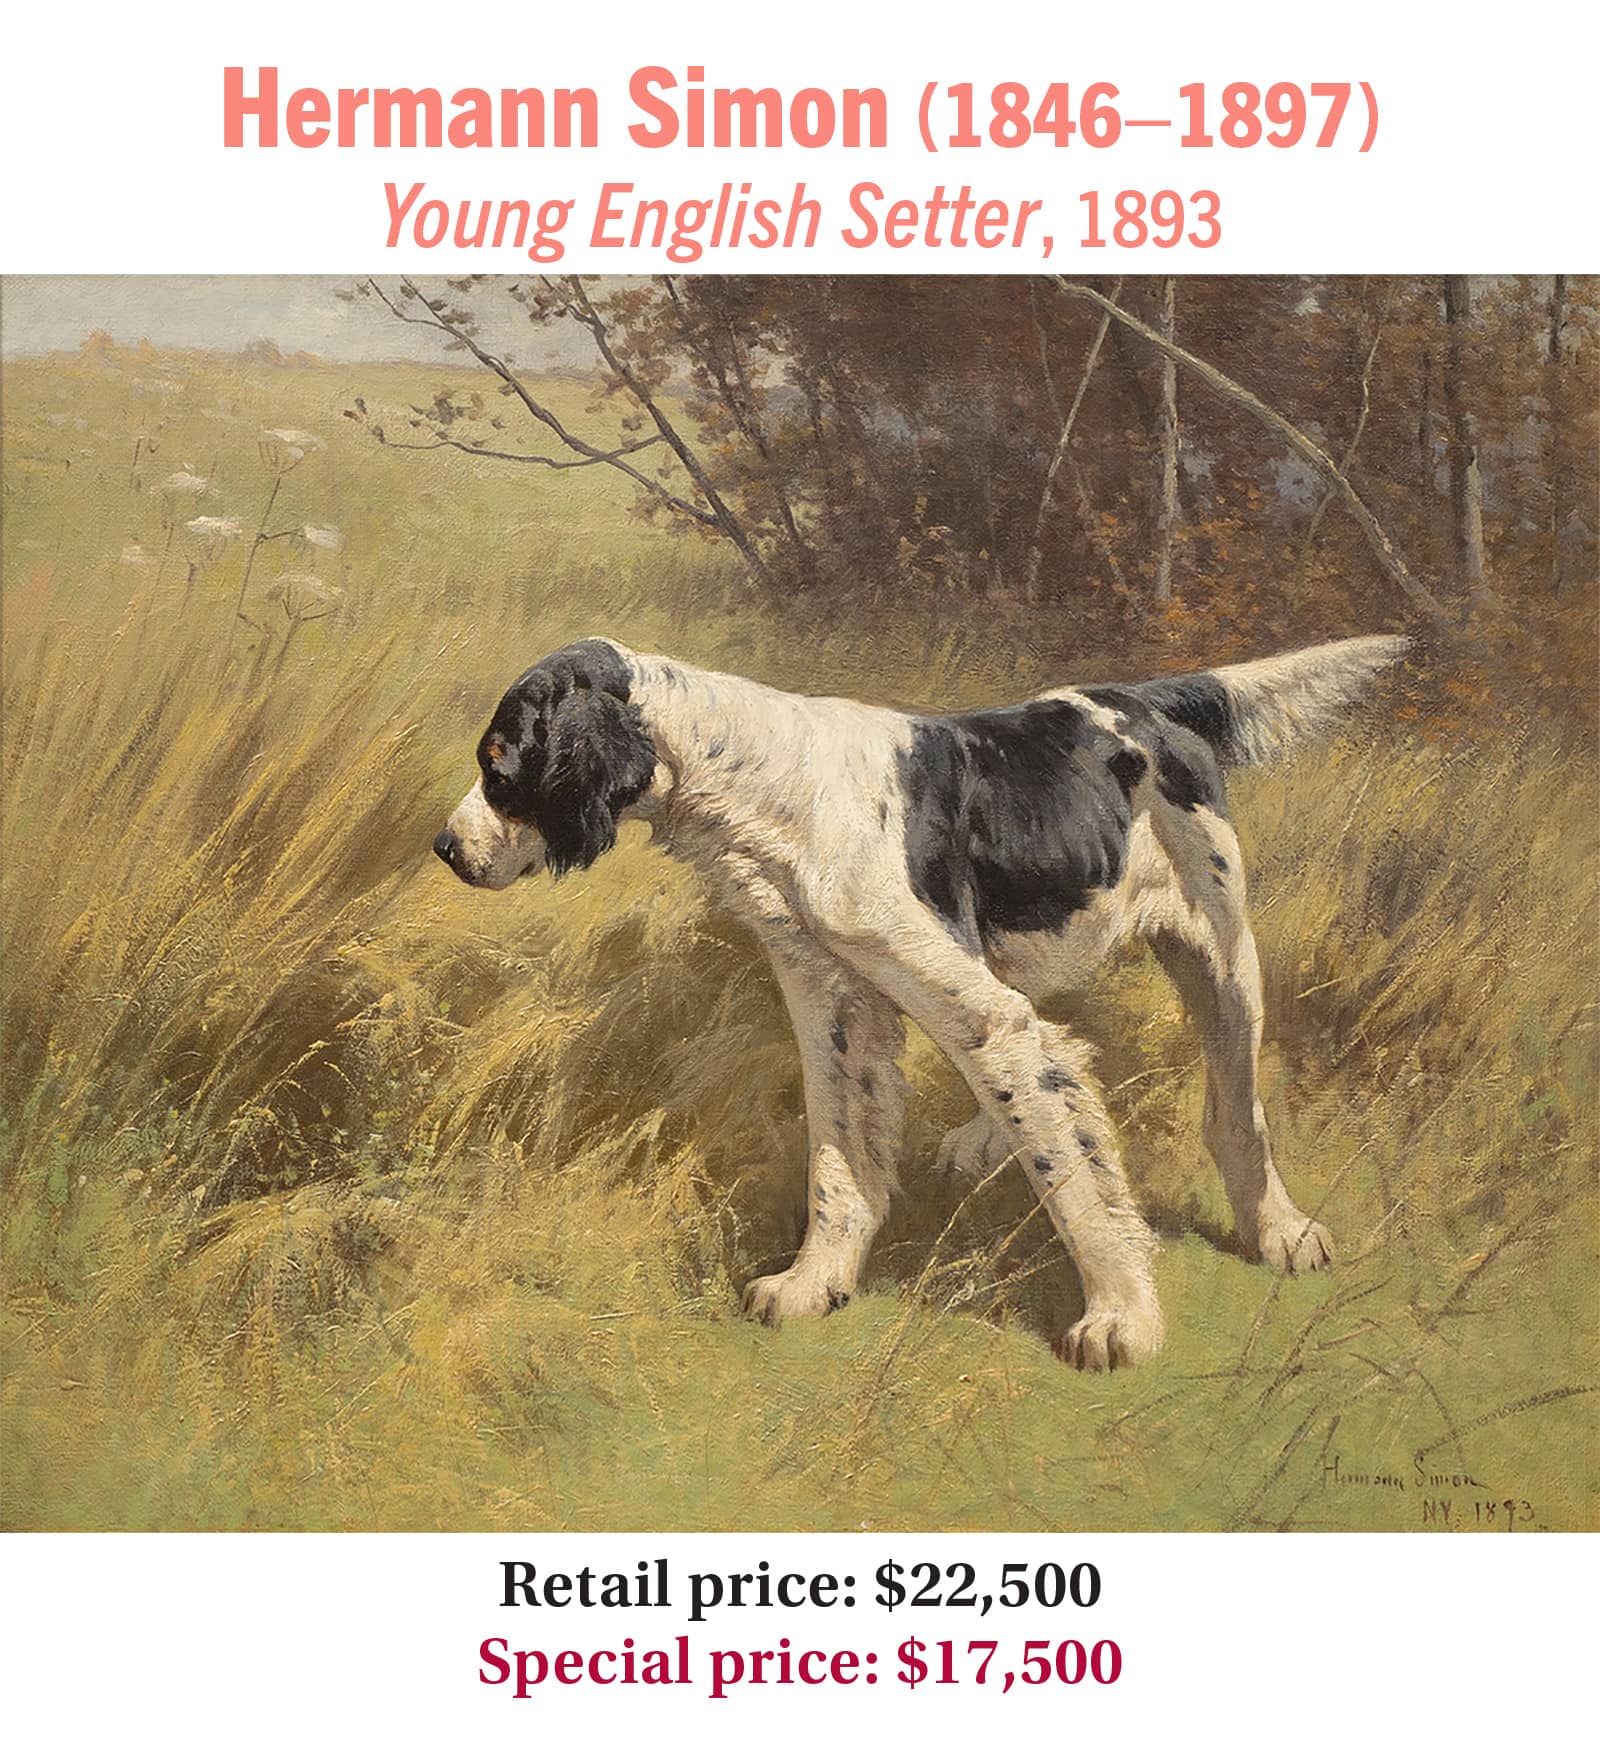 Hermann Simon (1846–1897), Young English Setter, 1893, oil on canvas, American sporting art